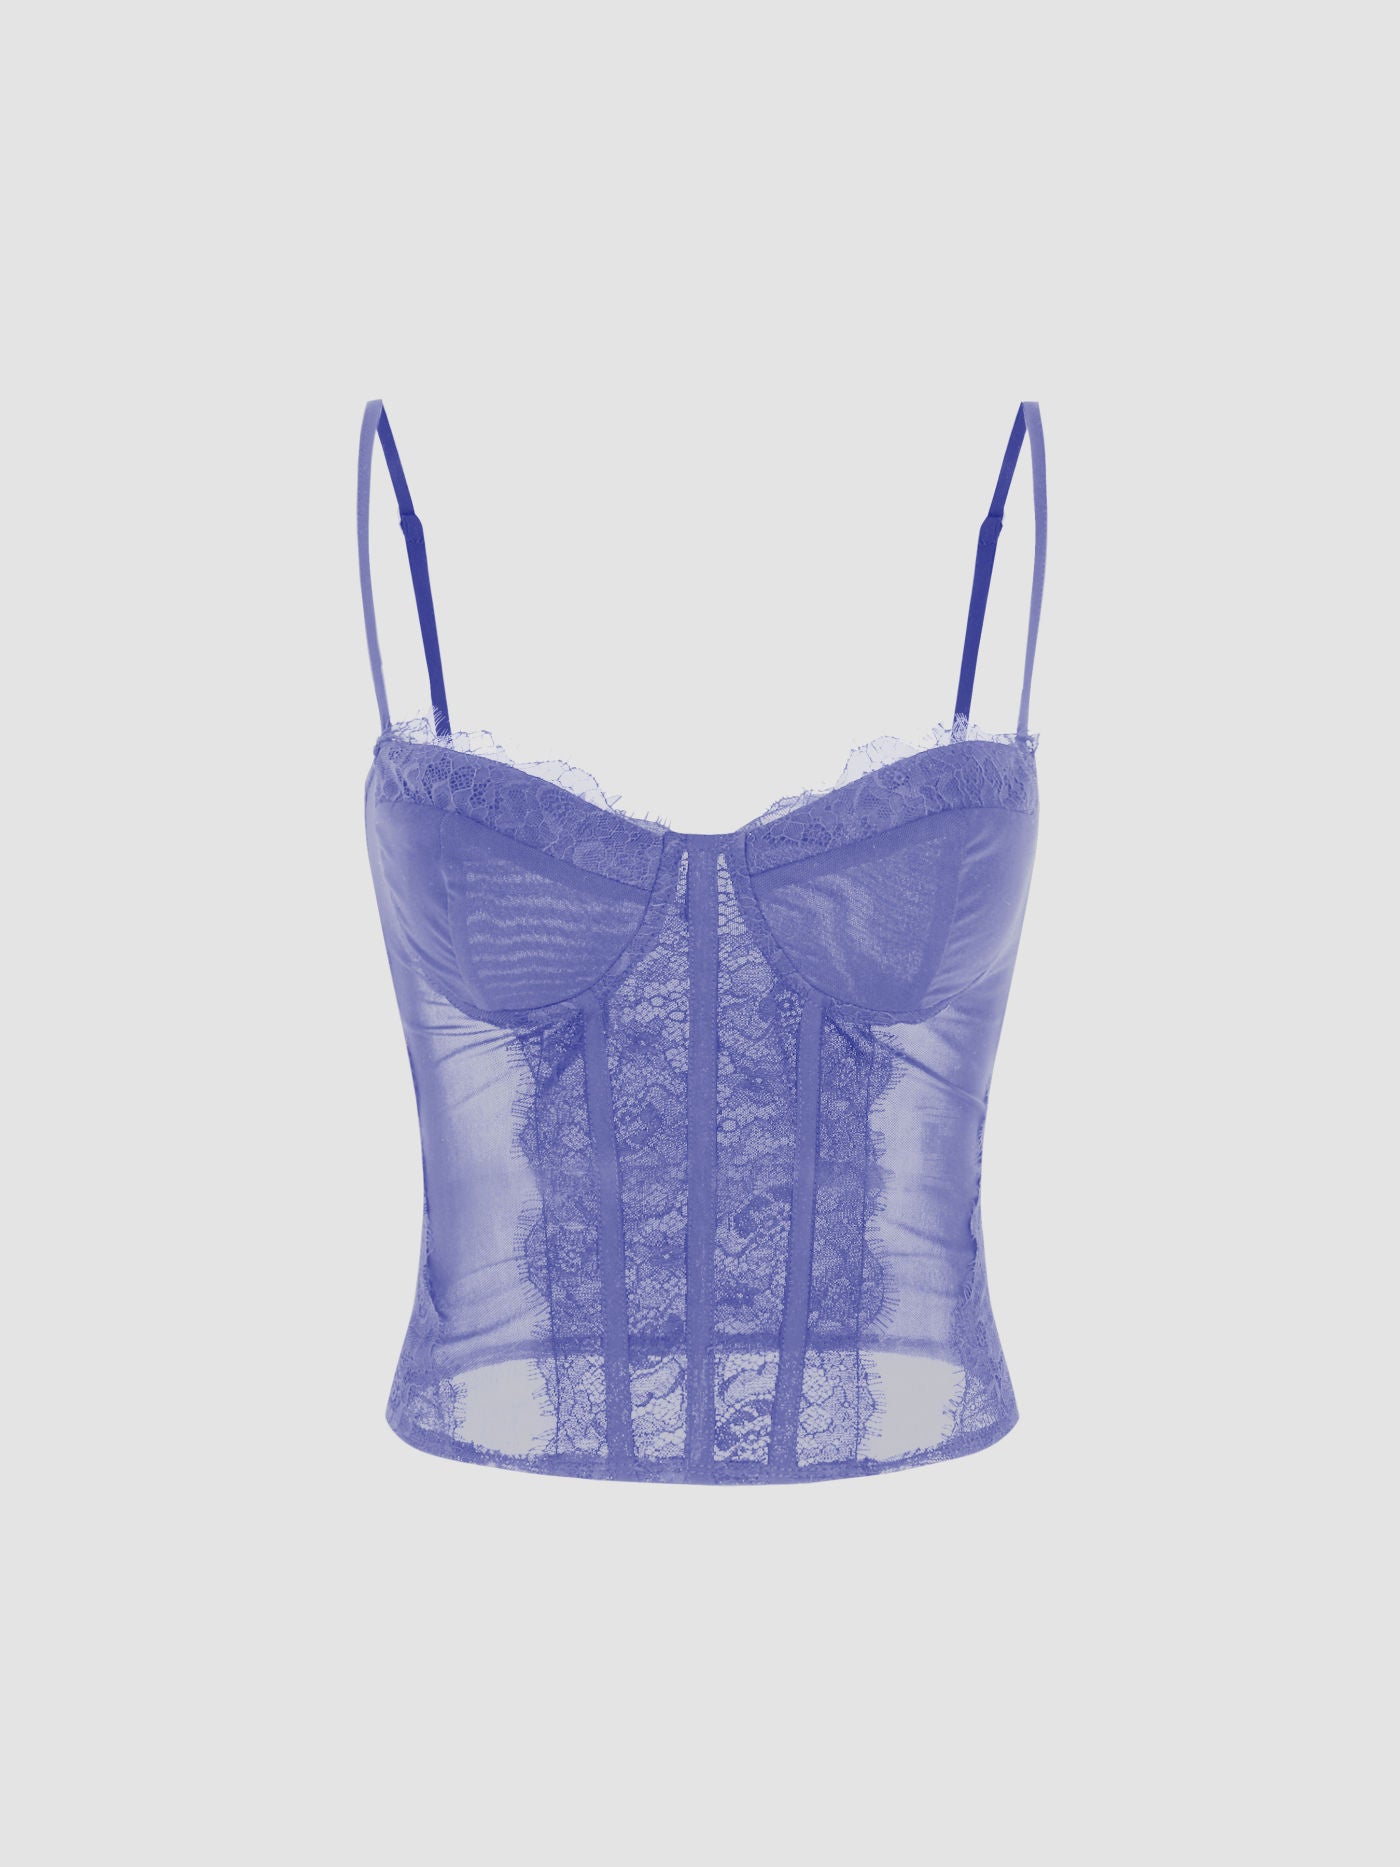 Cider Mesh Lace Bustier Top